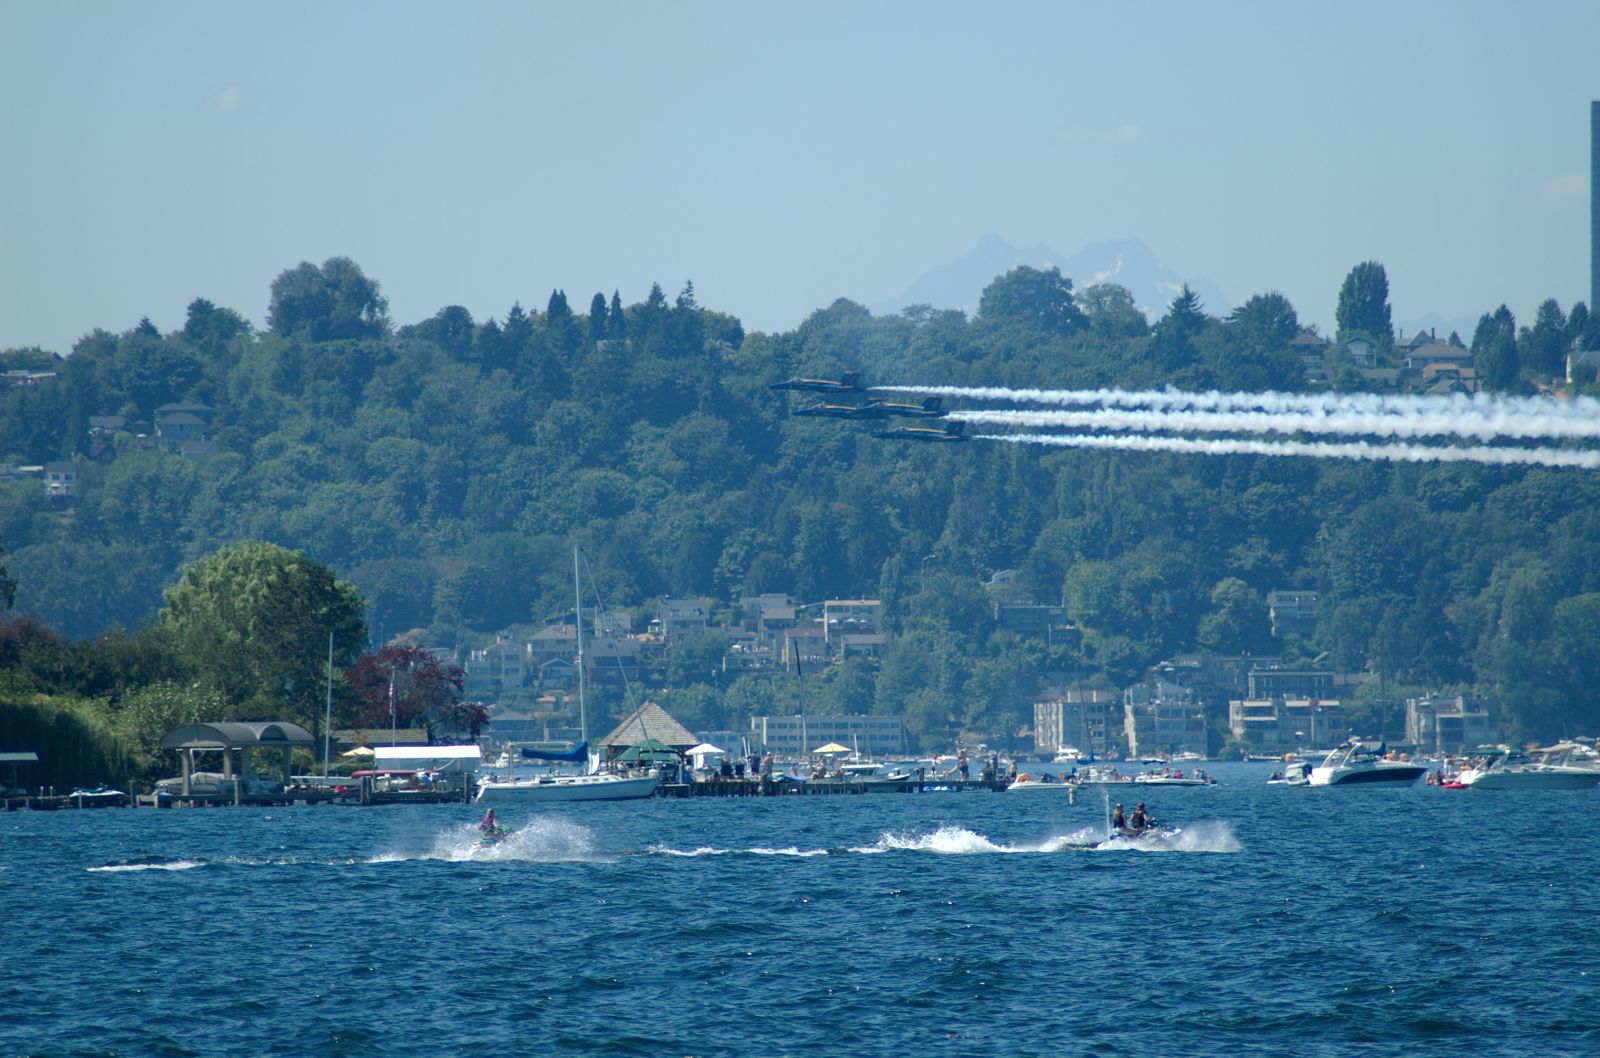 the planes are preparing to land on the water